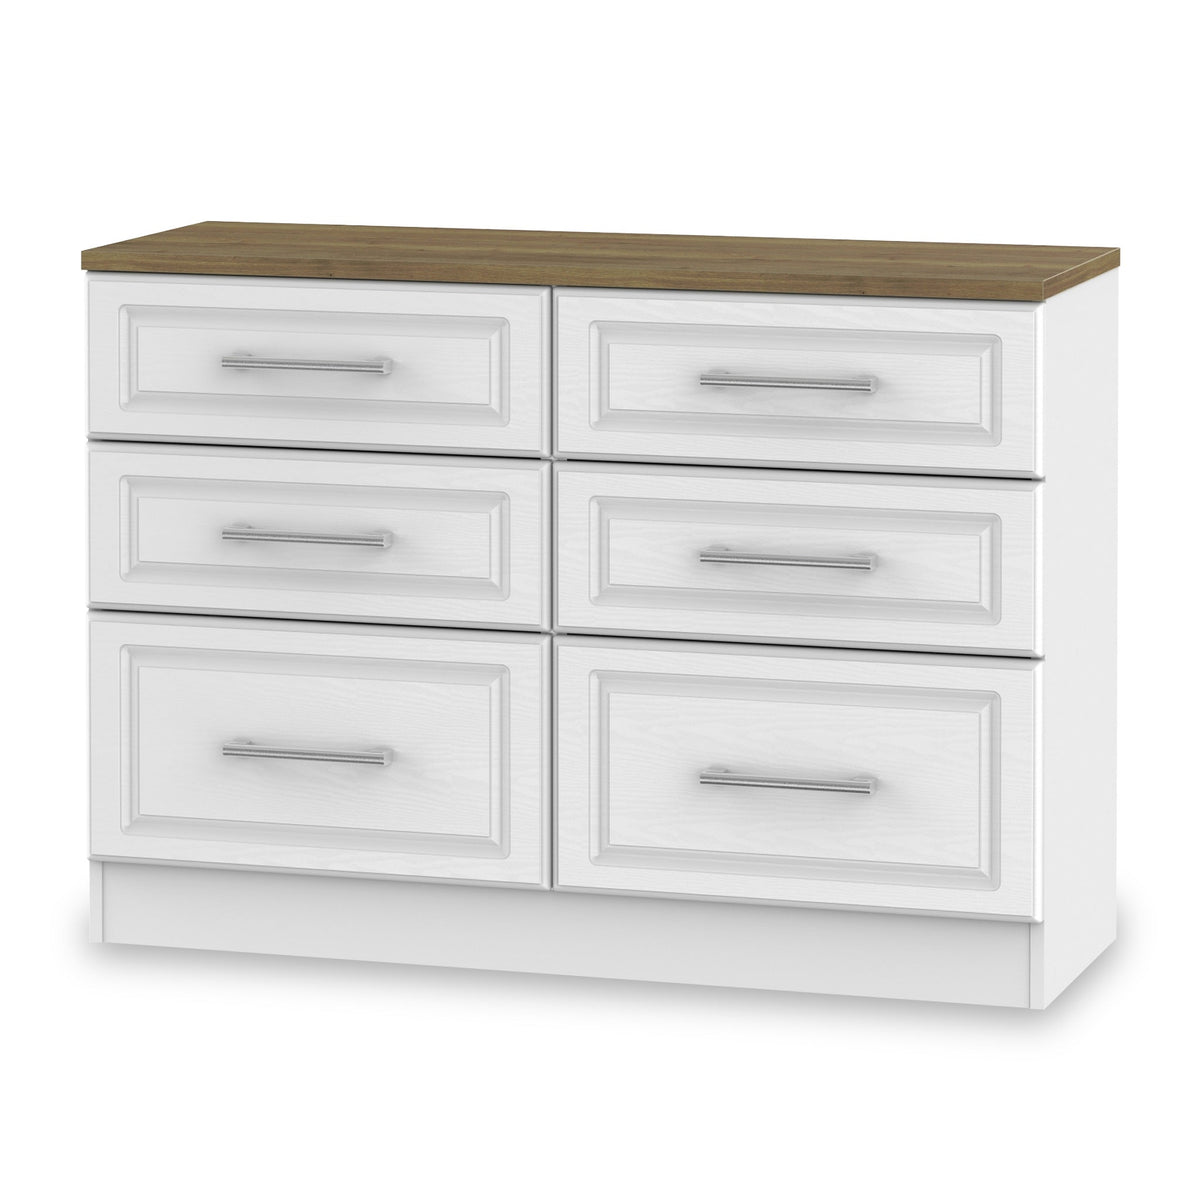 Talland White 6 Drawer Wide Chest from Roseland